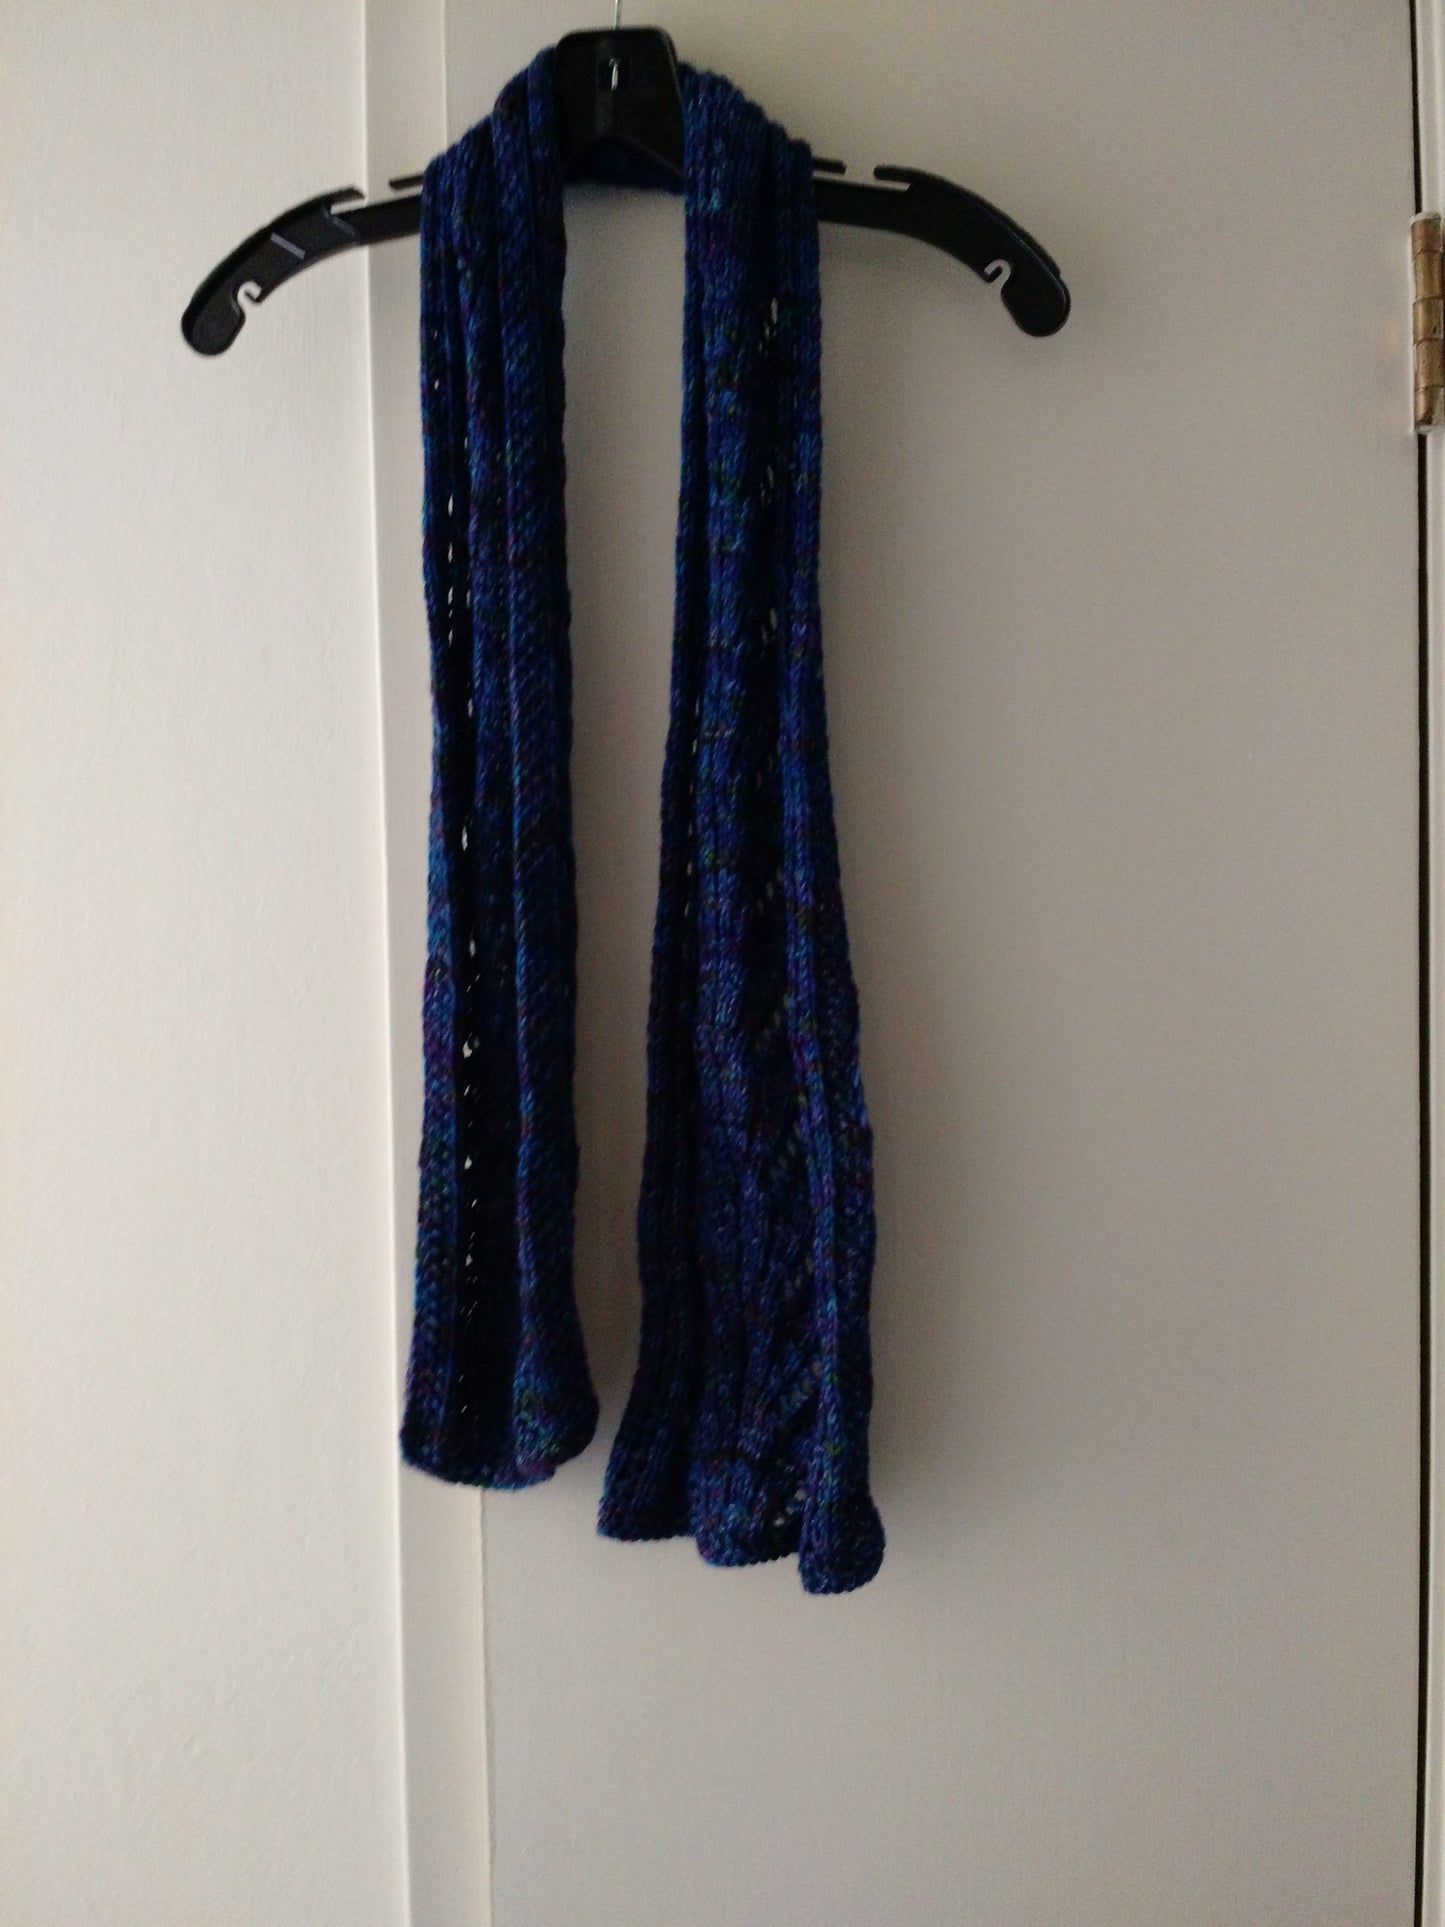 Handcrafted Yarn With Purples and Blues Scarf